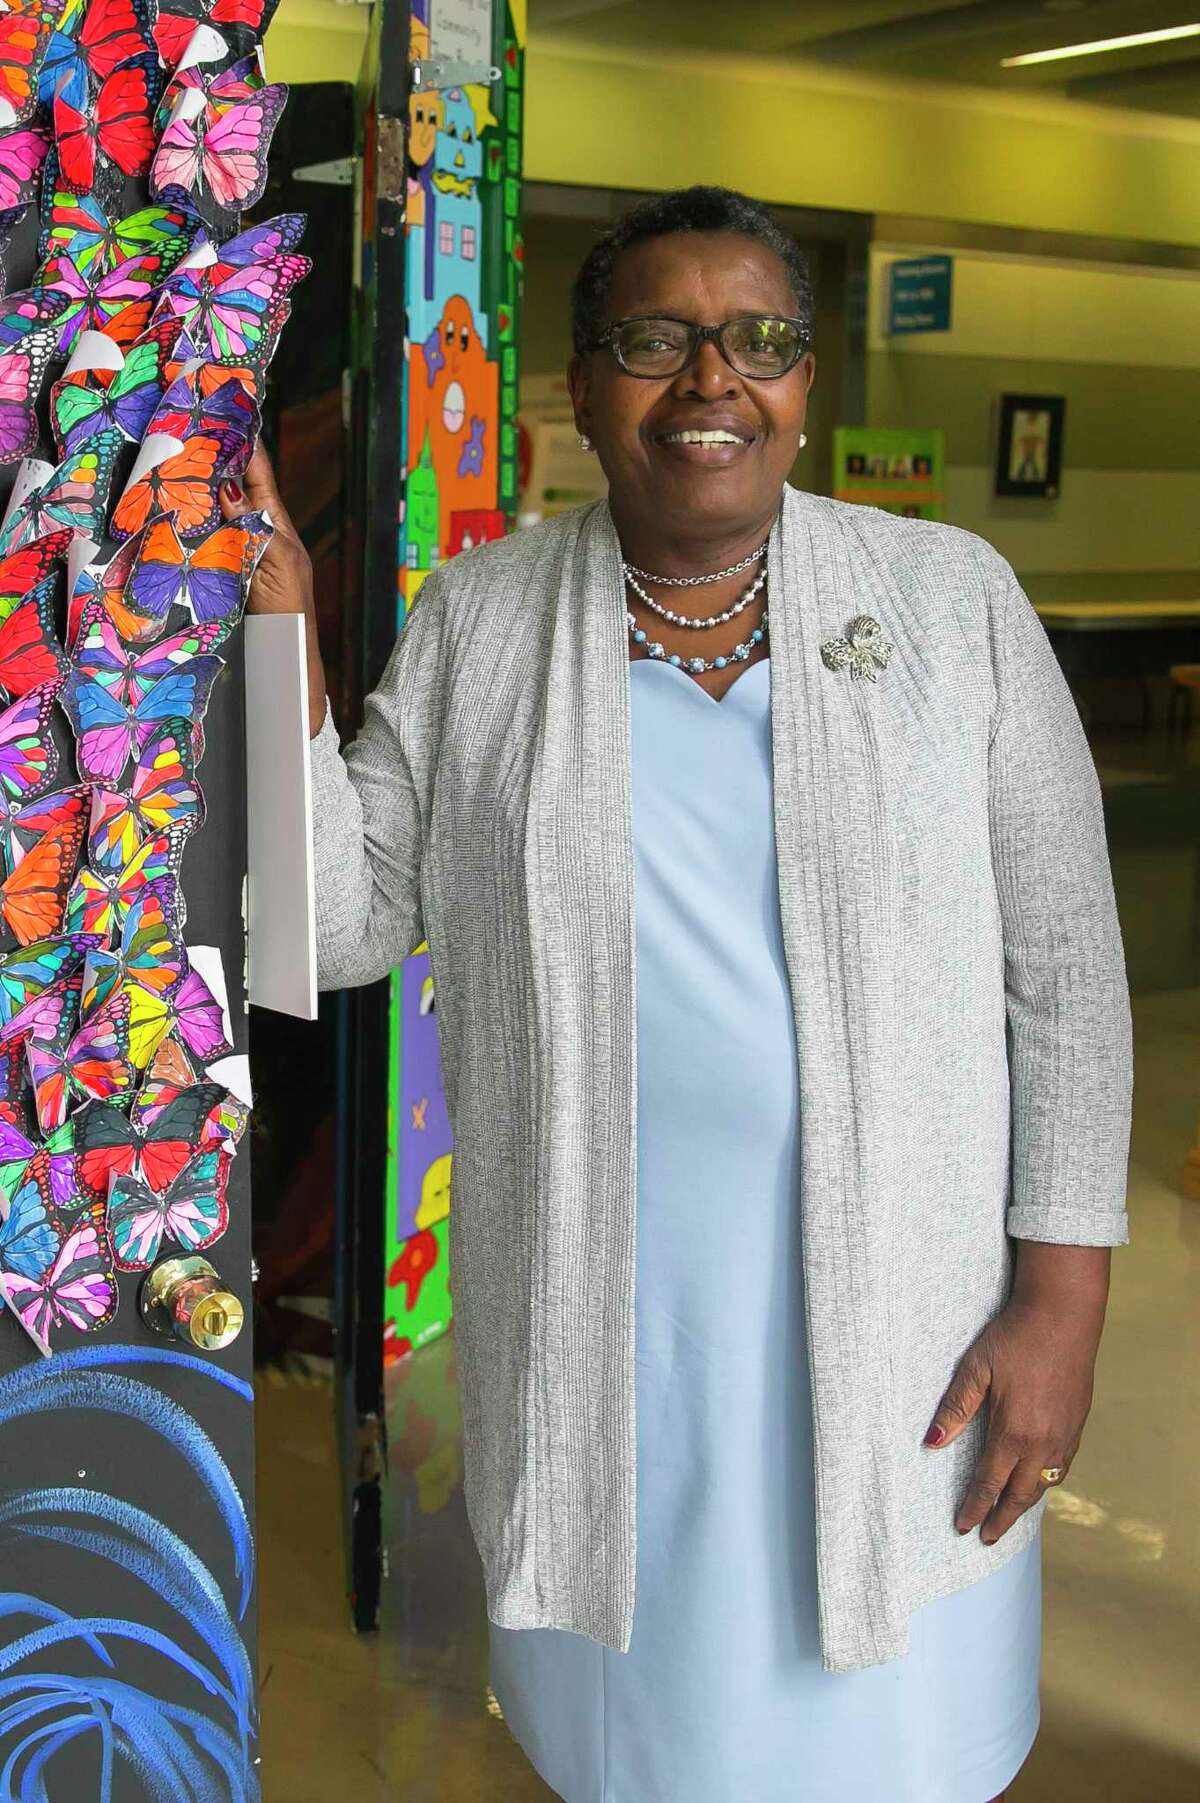 A portrait of Betti Wiggins, HISD's Nutrition Services Director. Wiggins moved to Houston just before Harvey to help the school district plan healthy meals on a tight budget.